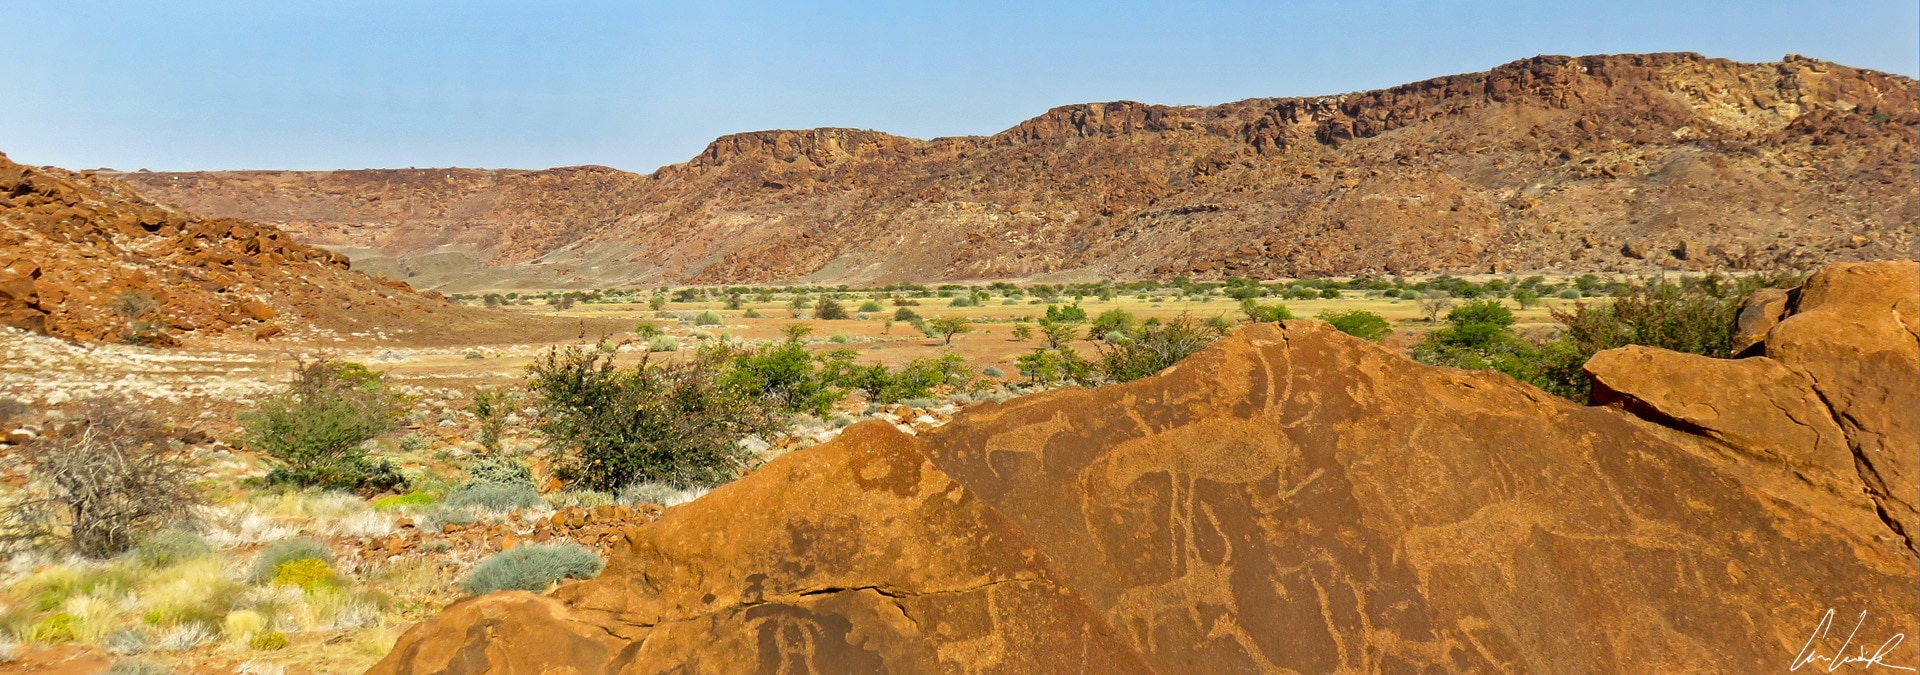 The Petrified Forest and Rock Carvings of Twyfelfontein